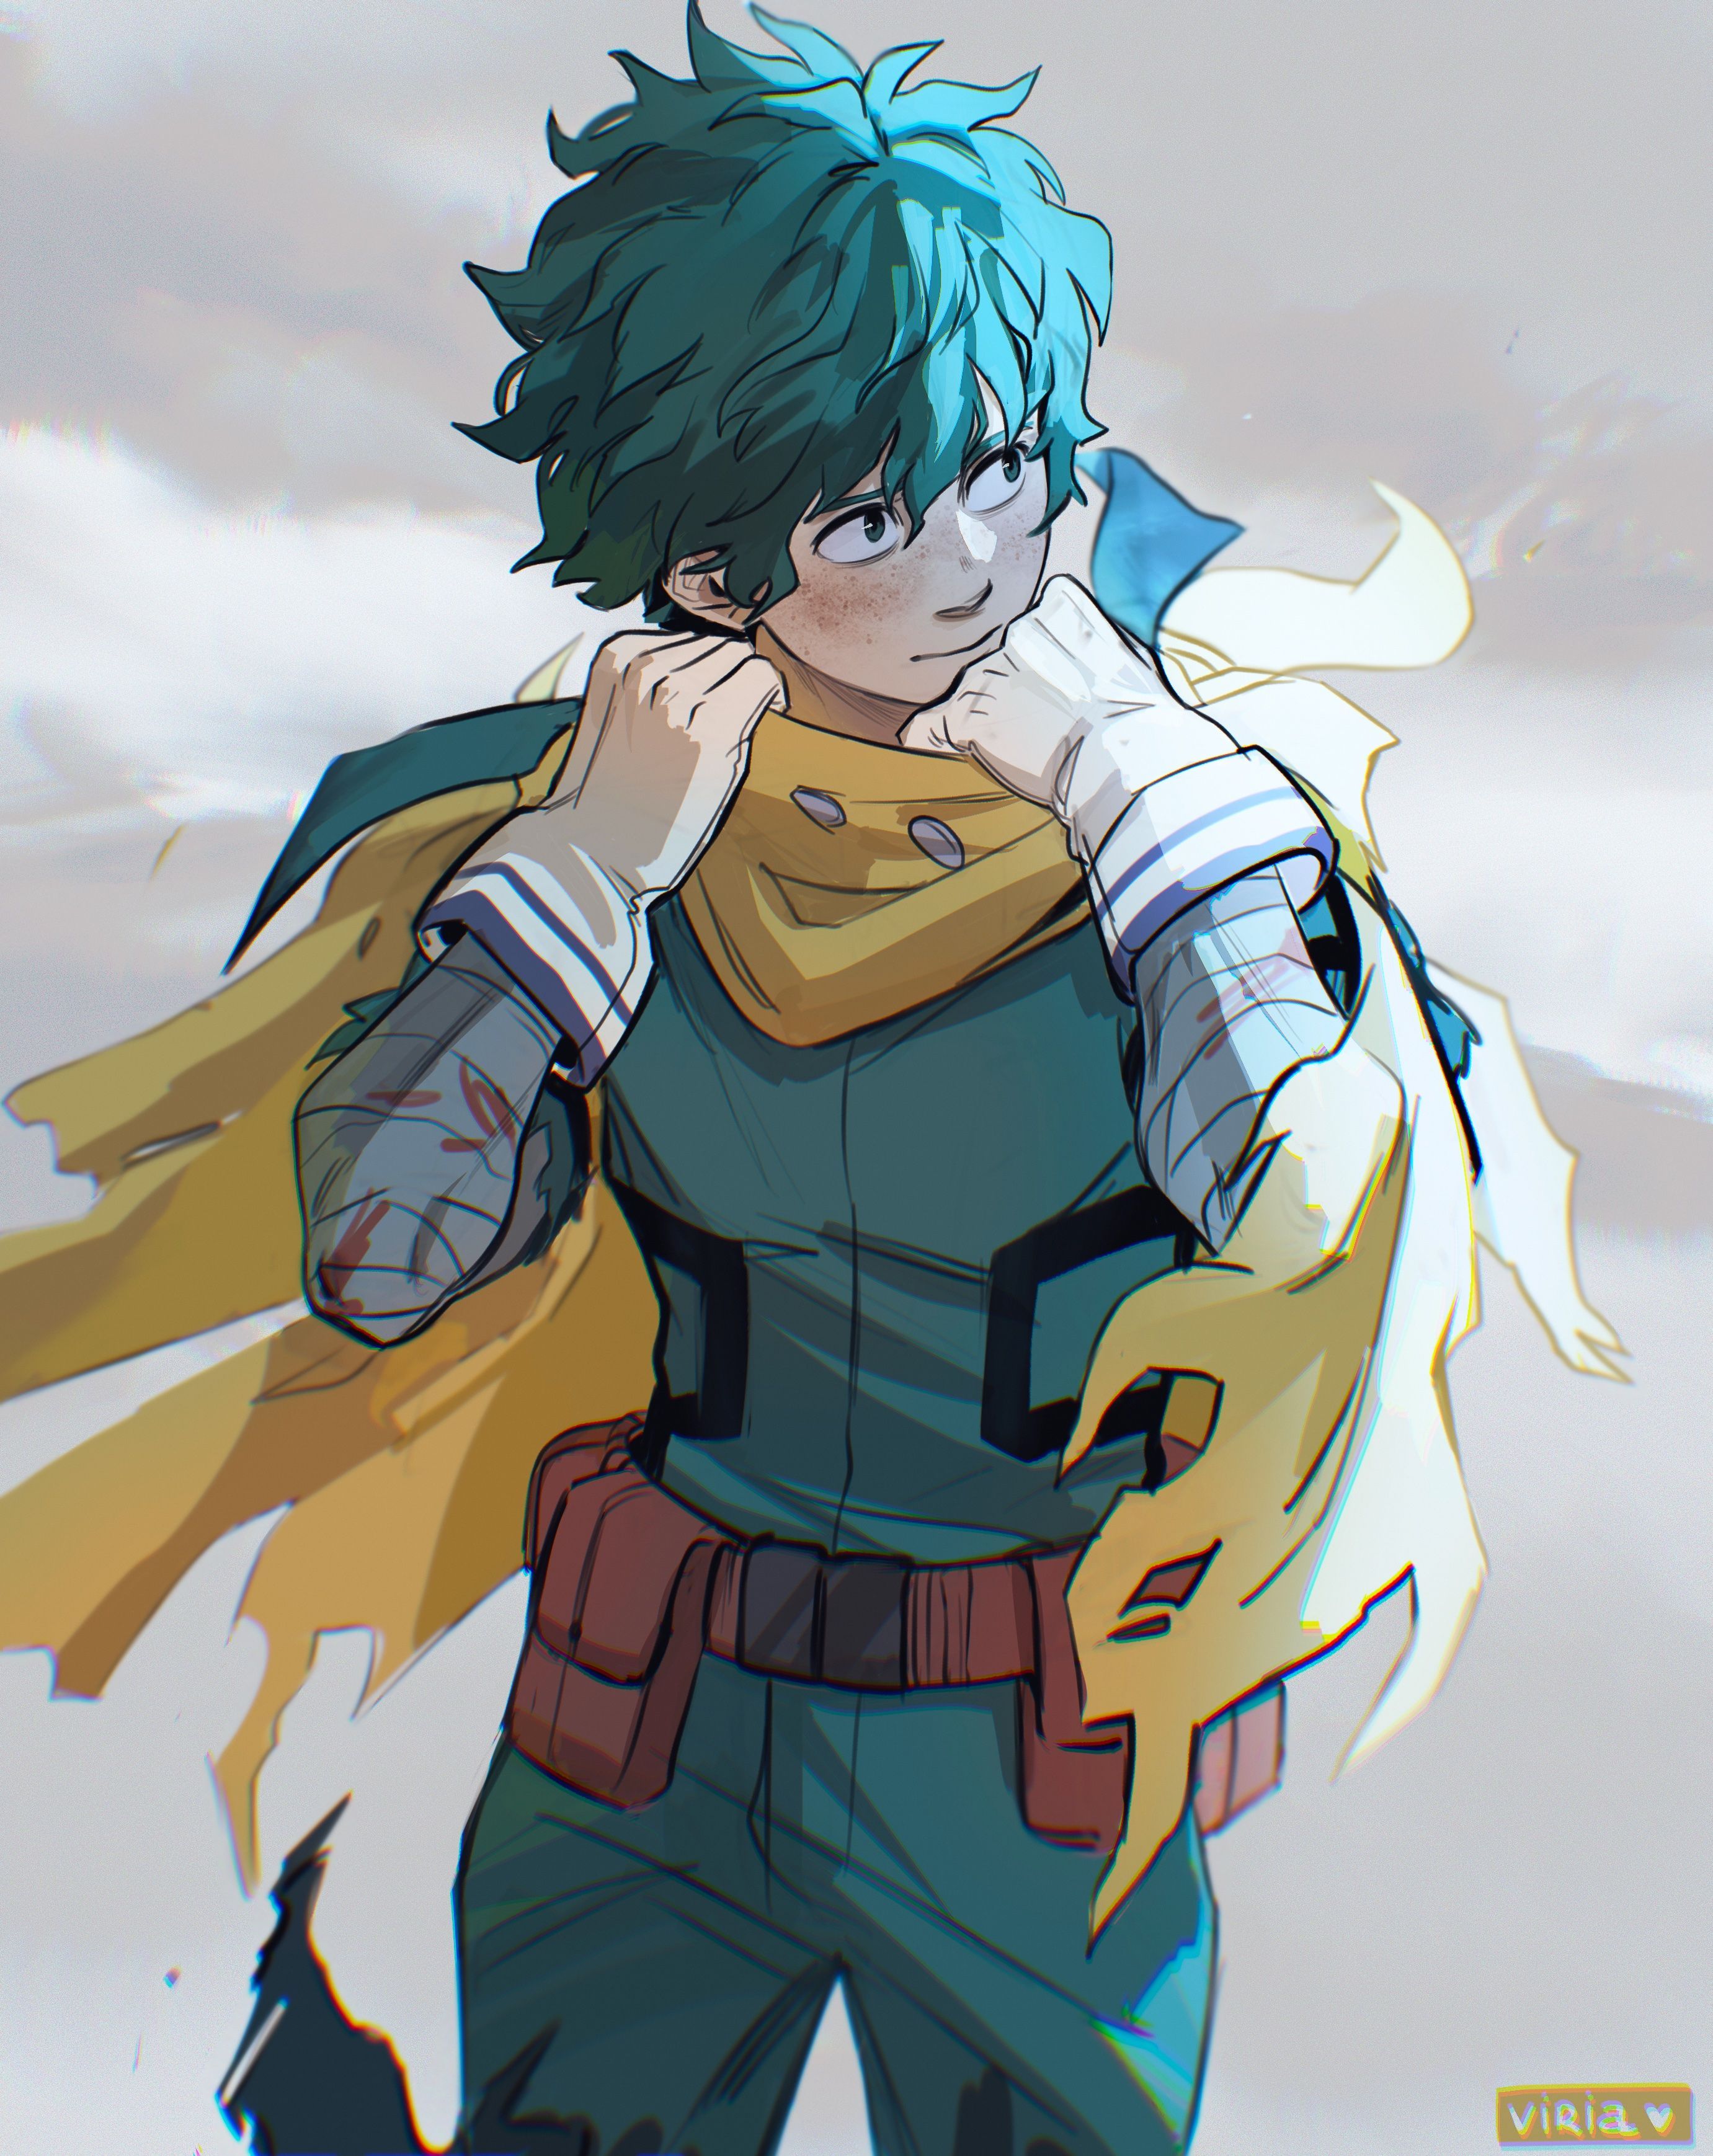 A green haired boy in a blue uniform and yellow scarf - Deku